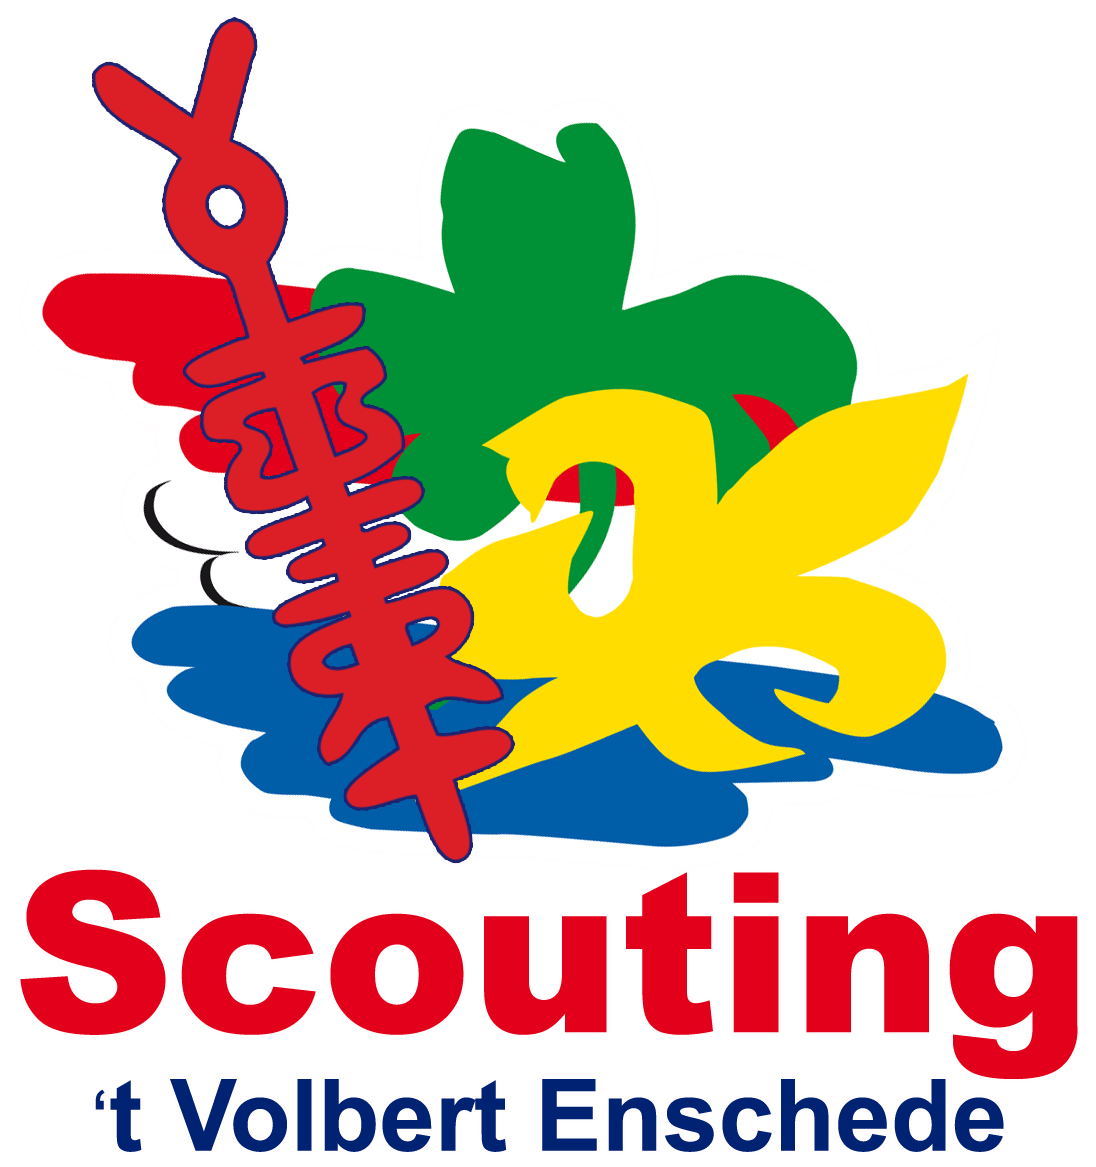 Scouting t Volbert Enschede